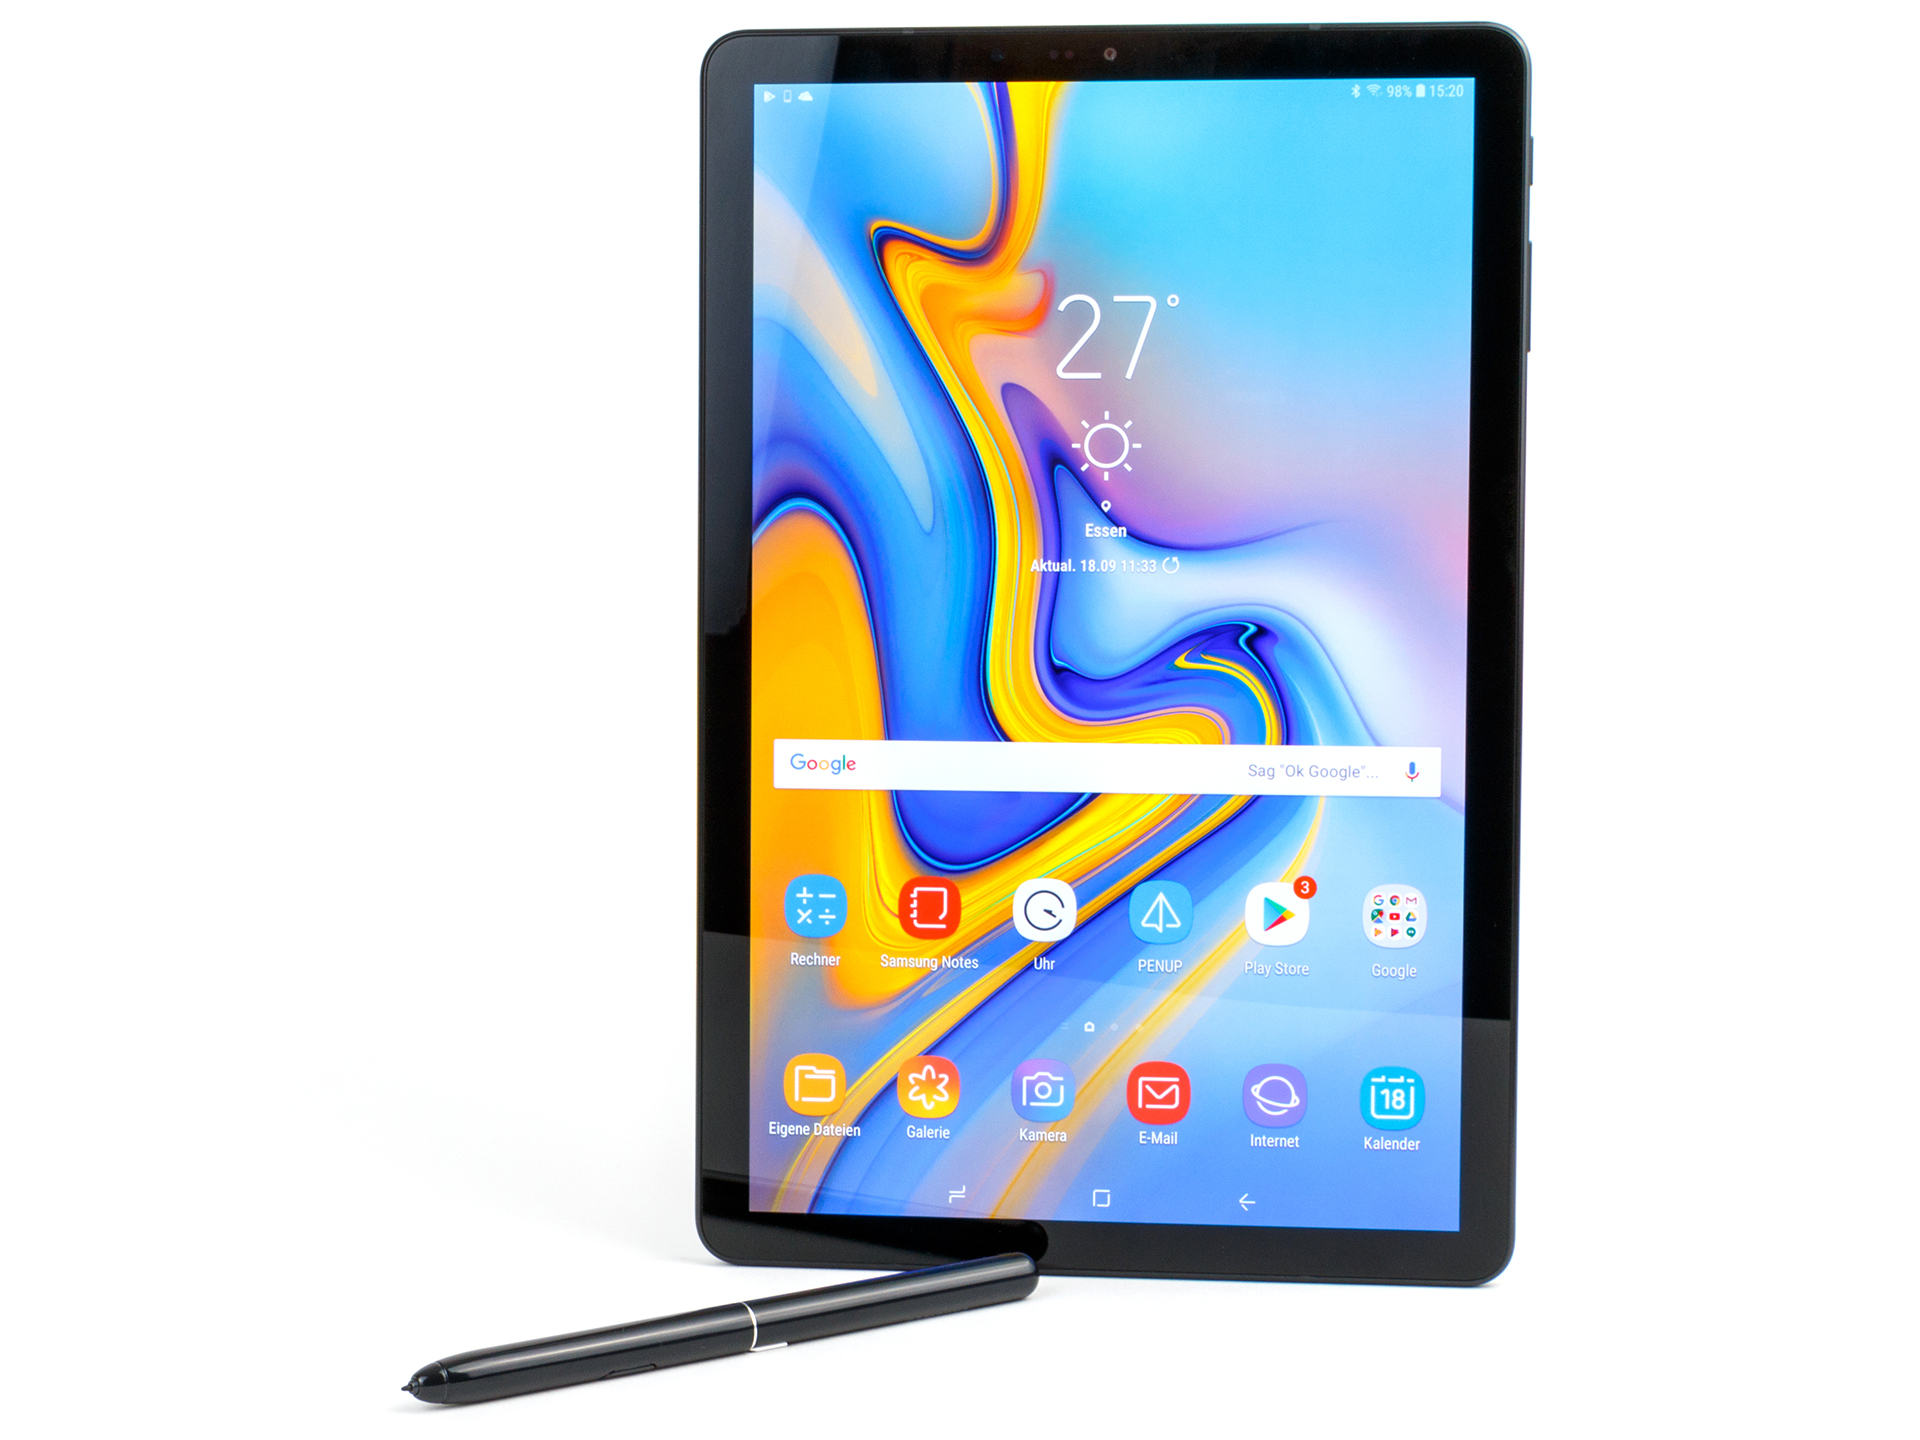 Victor Intimidatie Illusie Samsung Galaxy Tab S4 Tablet Review - NotebookCheck.net Reviews